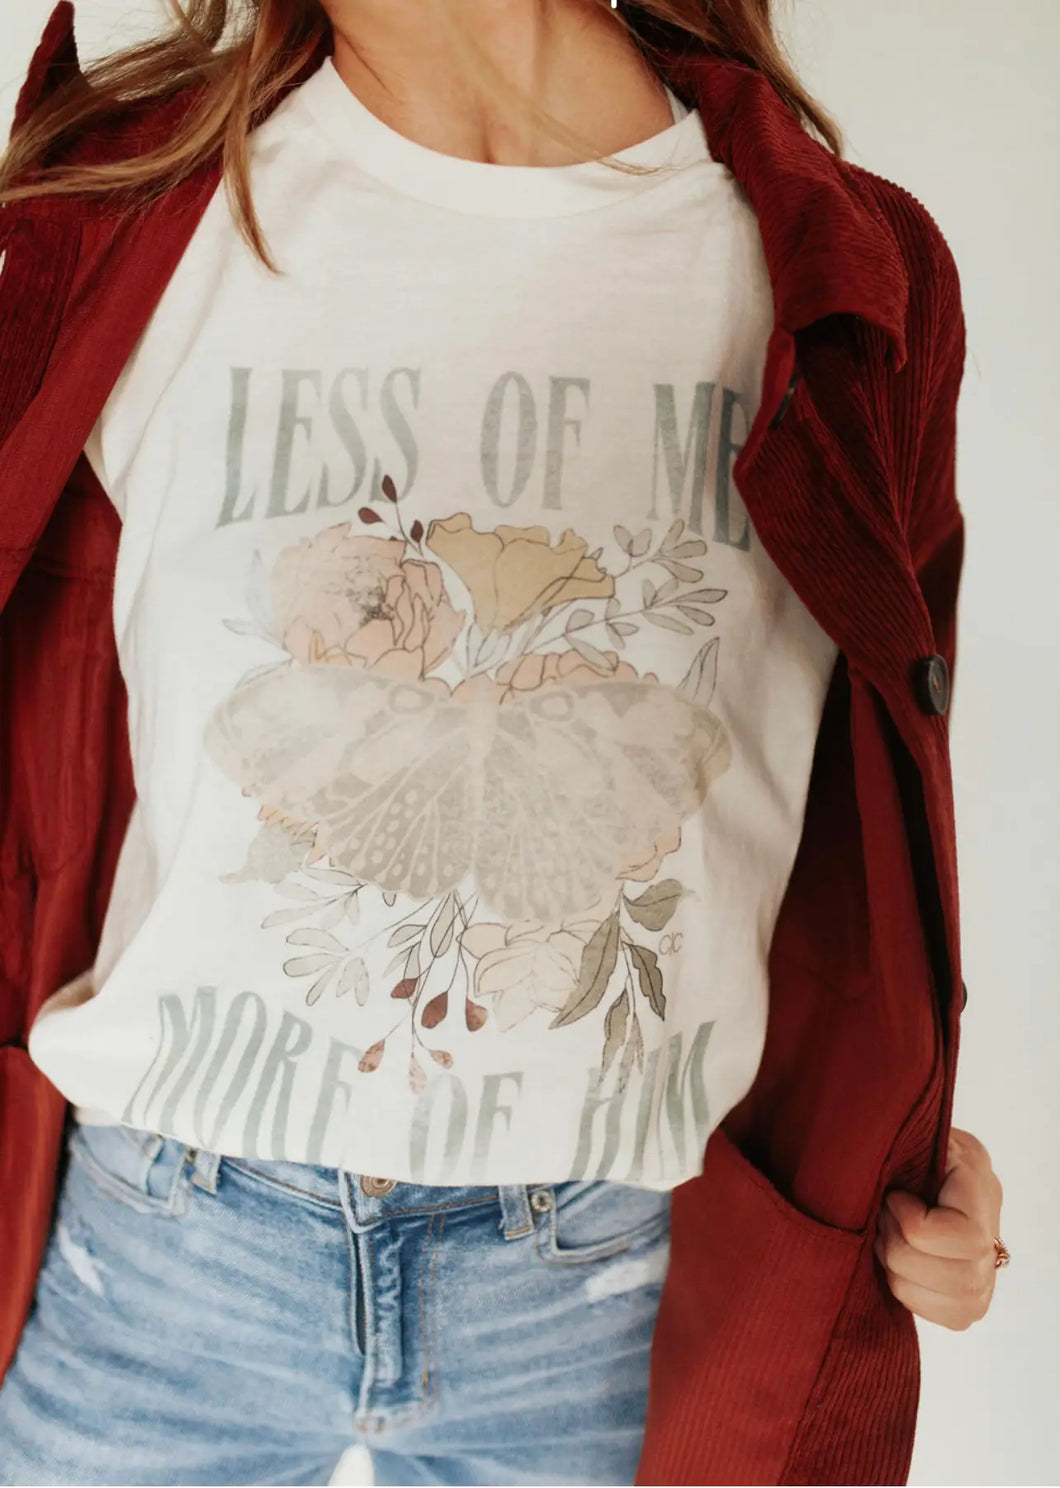 Less of Me, More of Him Graphic Tee